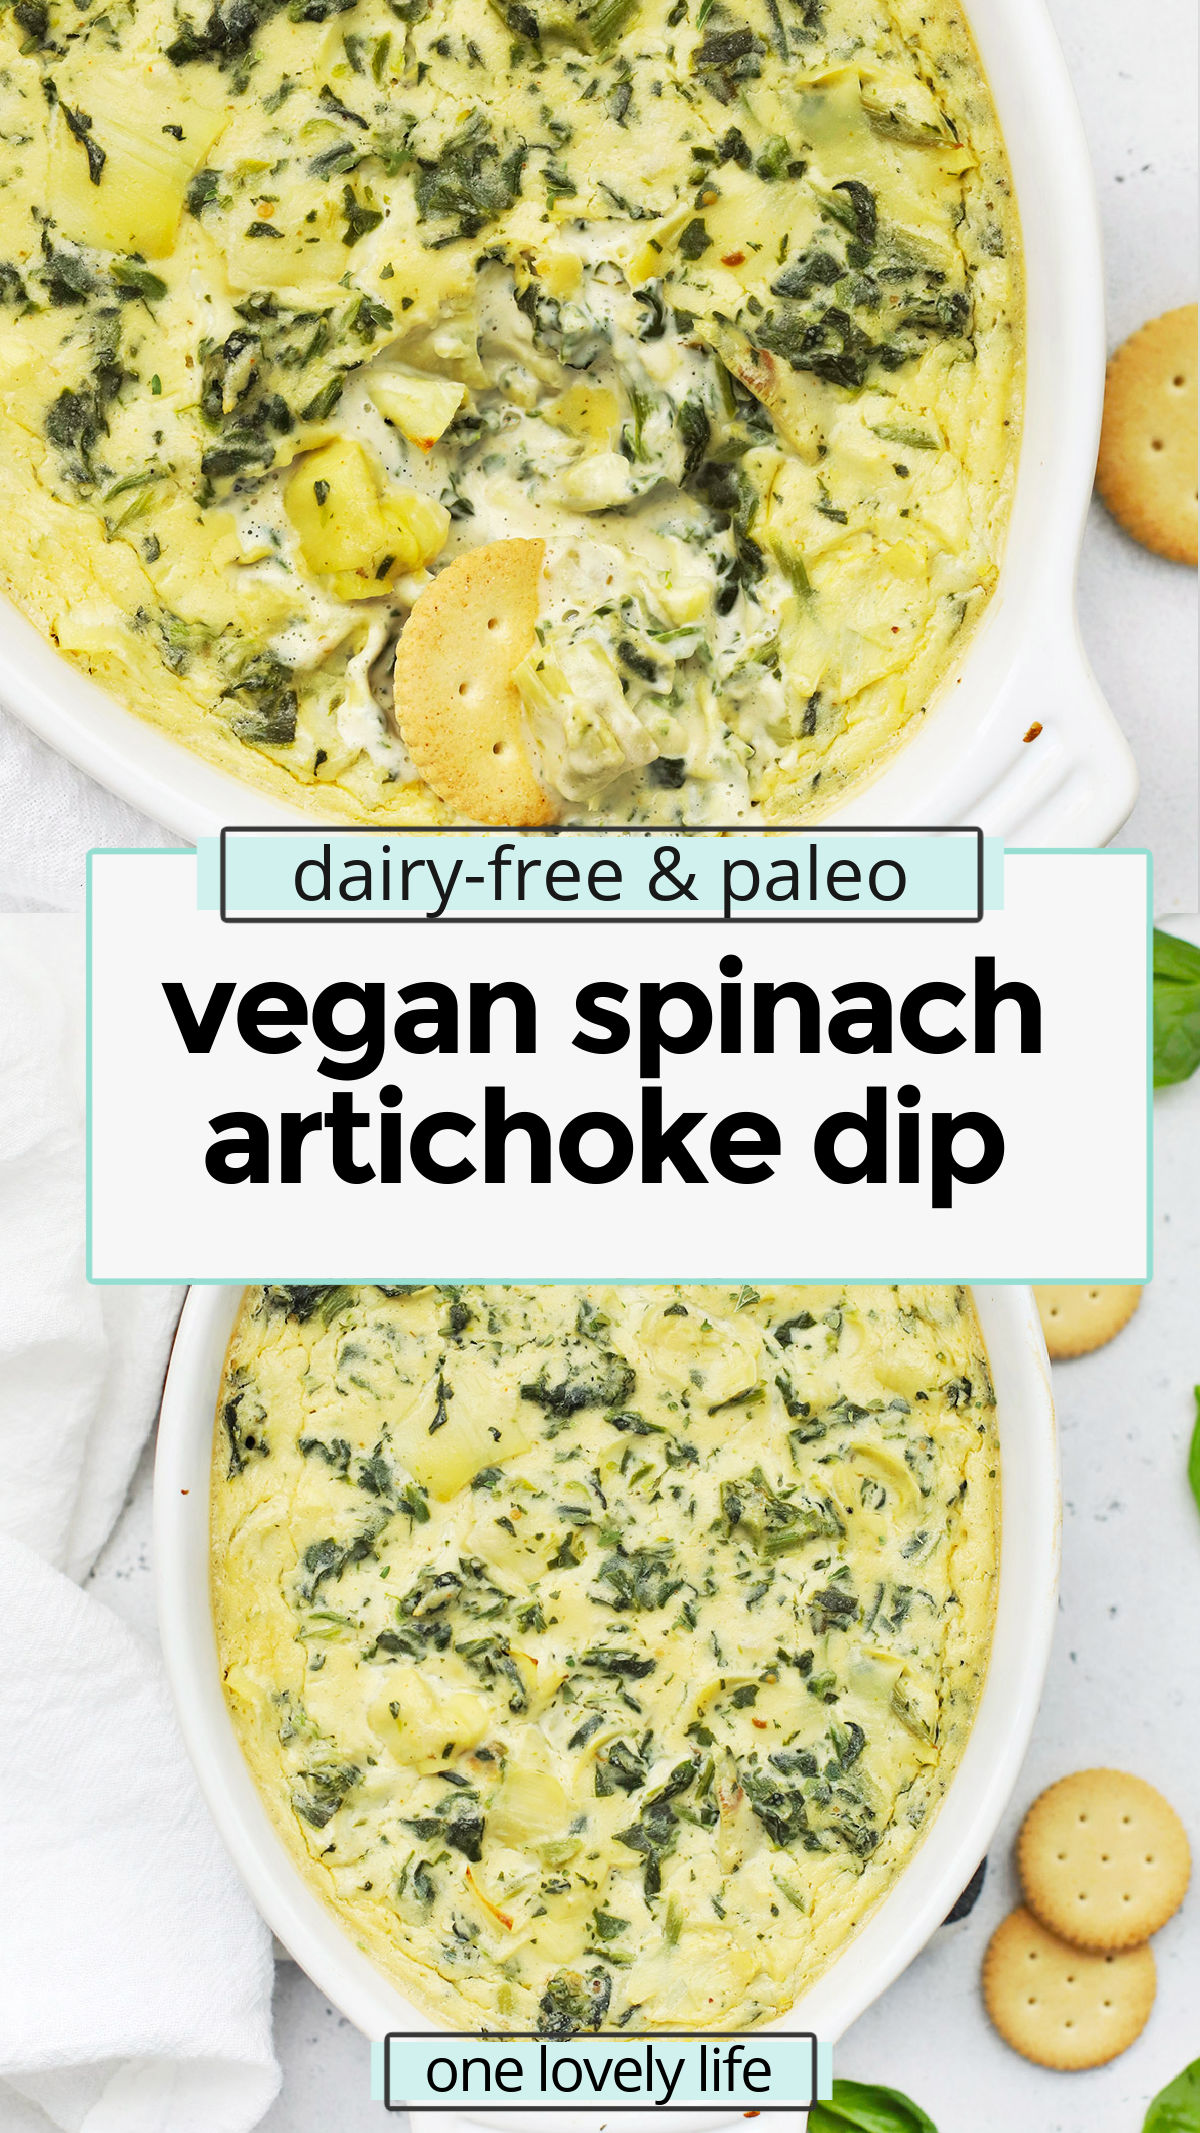 Vegan Artichoke Dip - Our vegan spinach artichoke dip is warm, cozy, and delicious. It's a perfect holiday or party appetizer and goes great with crackers, sliced baguettes, and more! (Dairy-Free, Paleo) // Paleo Artichoke Dip // Paleo Spinach Artichoke Dip // Dairy-Free Artichoke Dip // Paleo Appetizer // Vegan Appetizer // Dairy Free Spinach Artichoke Dip // Paleo Spinach Artichoke Dip